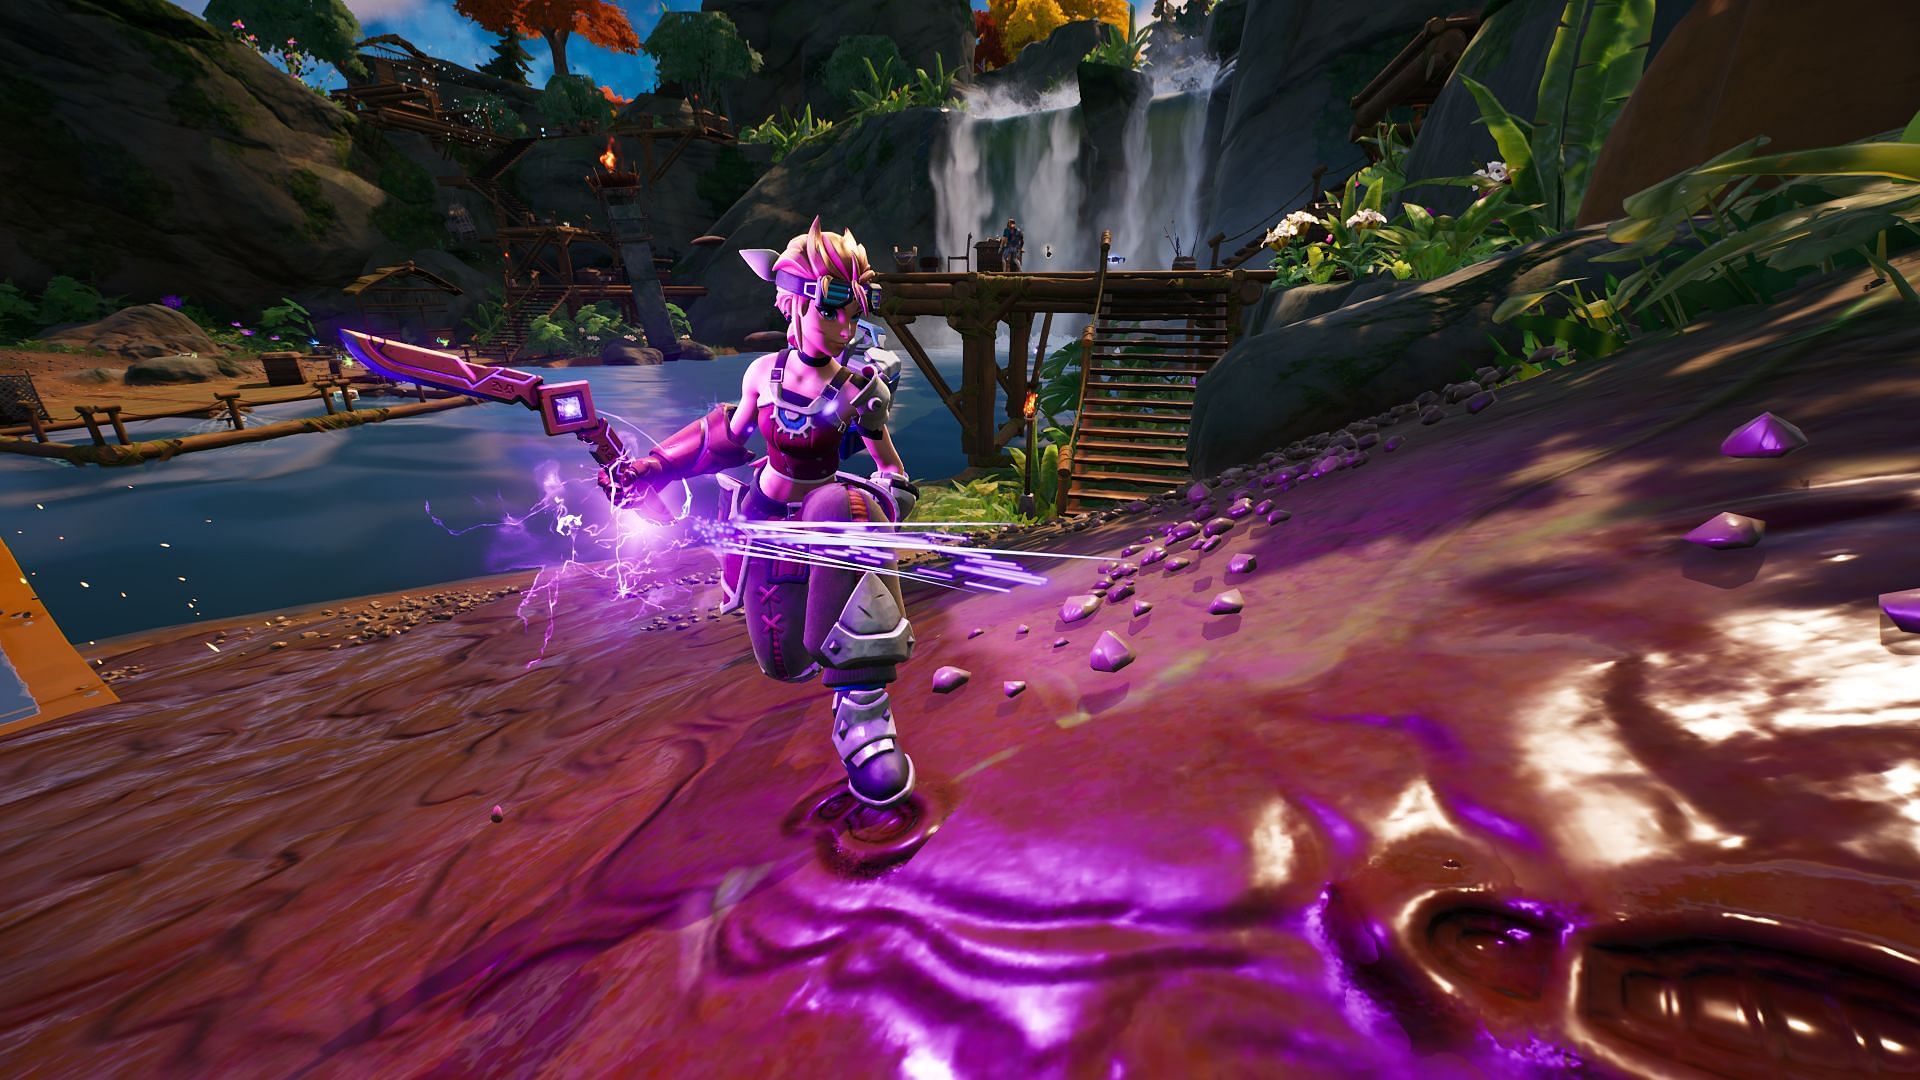 Sliding while being covered in Mud will provide a speed boost (Image via Epic Games/Fortnite)